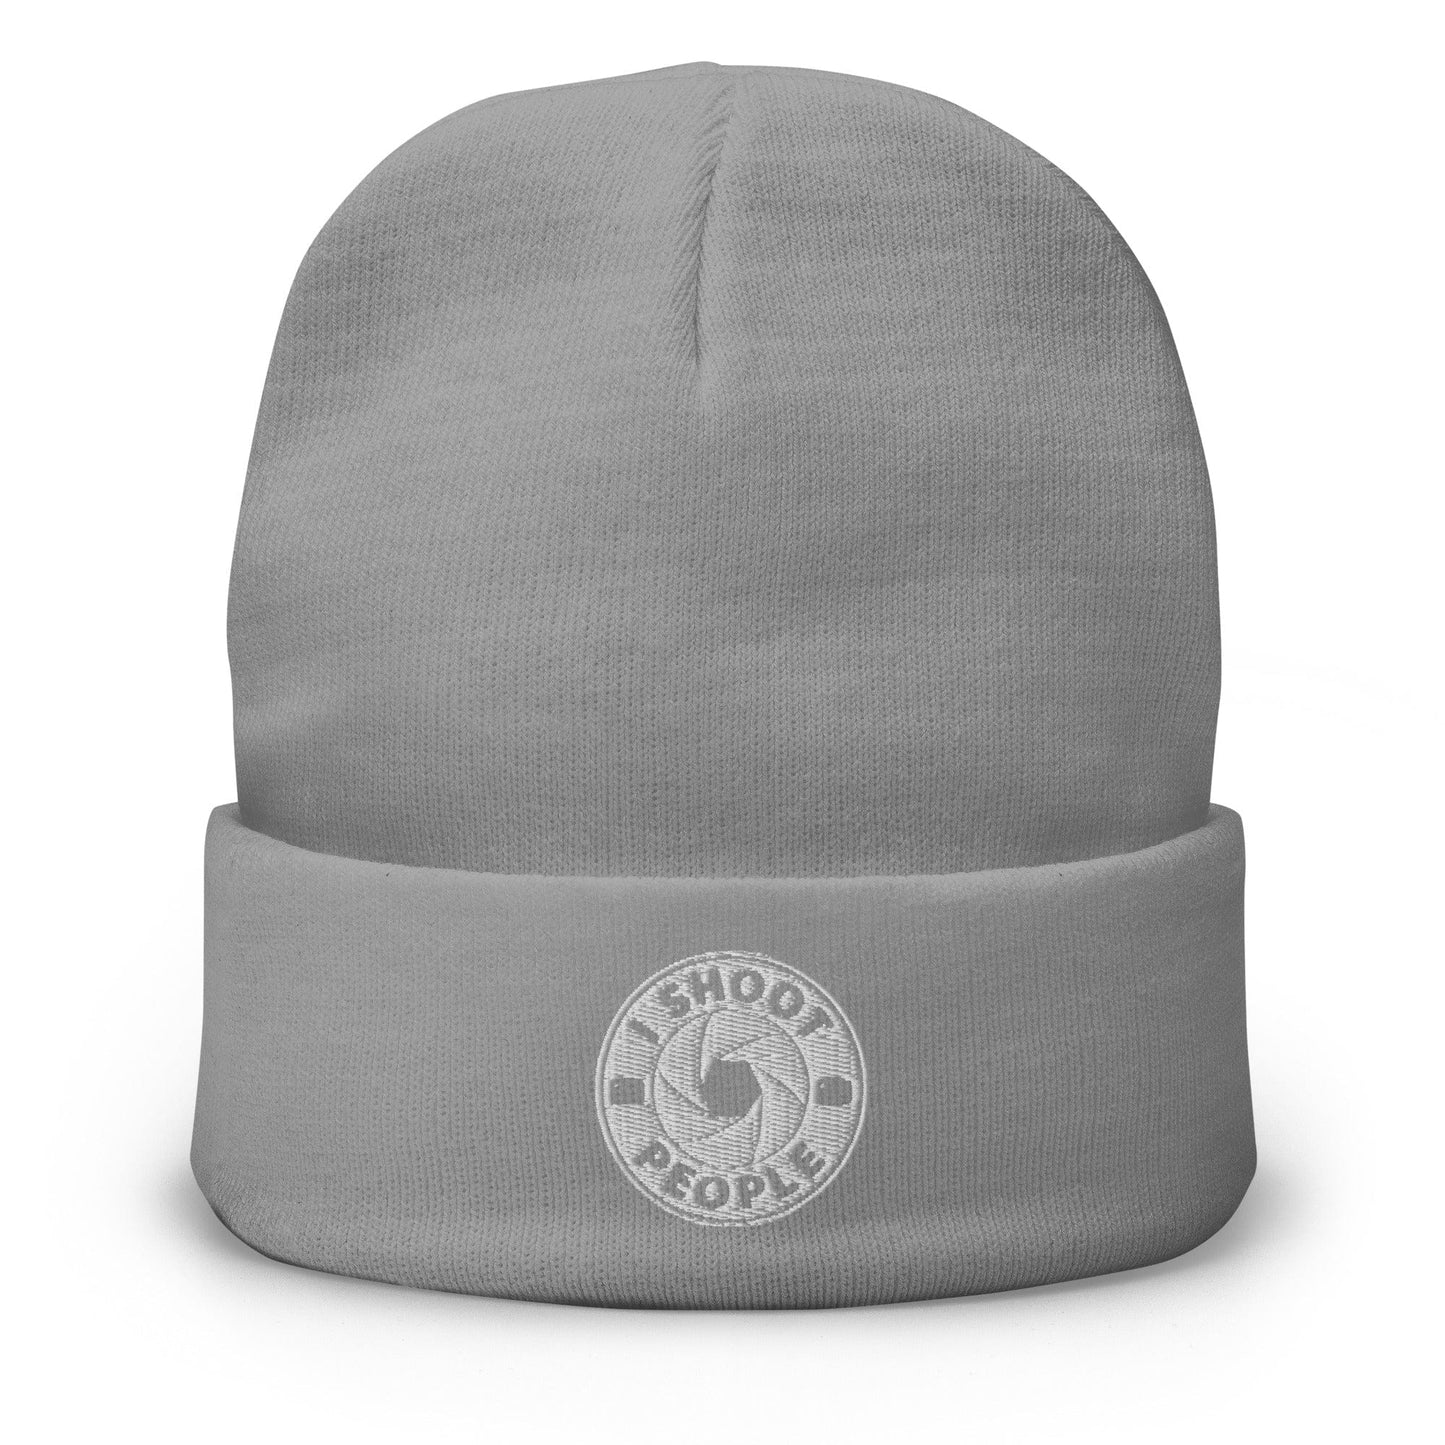 Production Apparel I Shoot People Beanie Gray